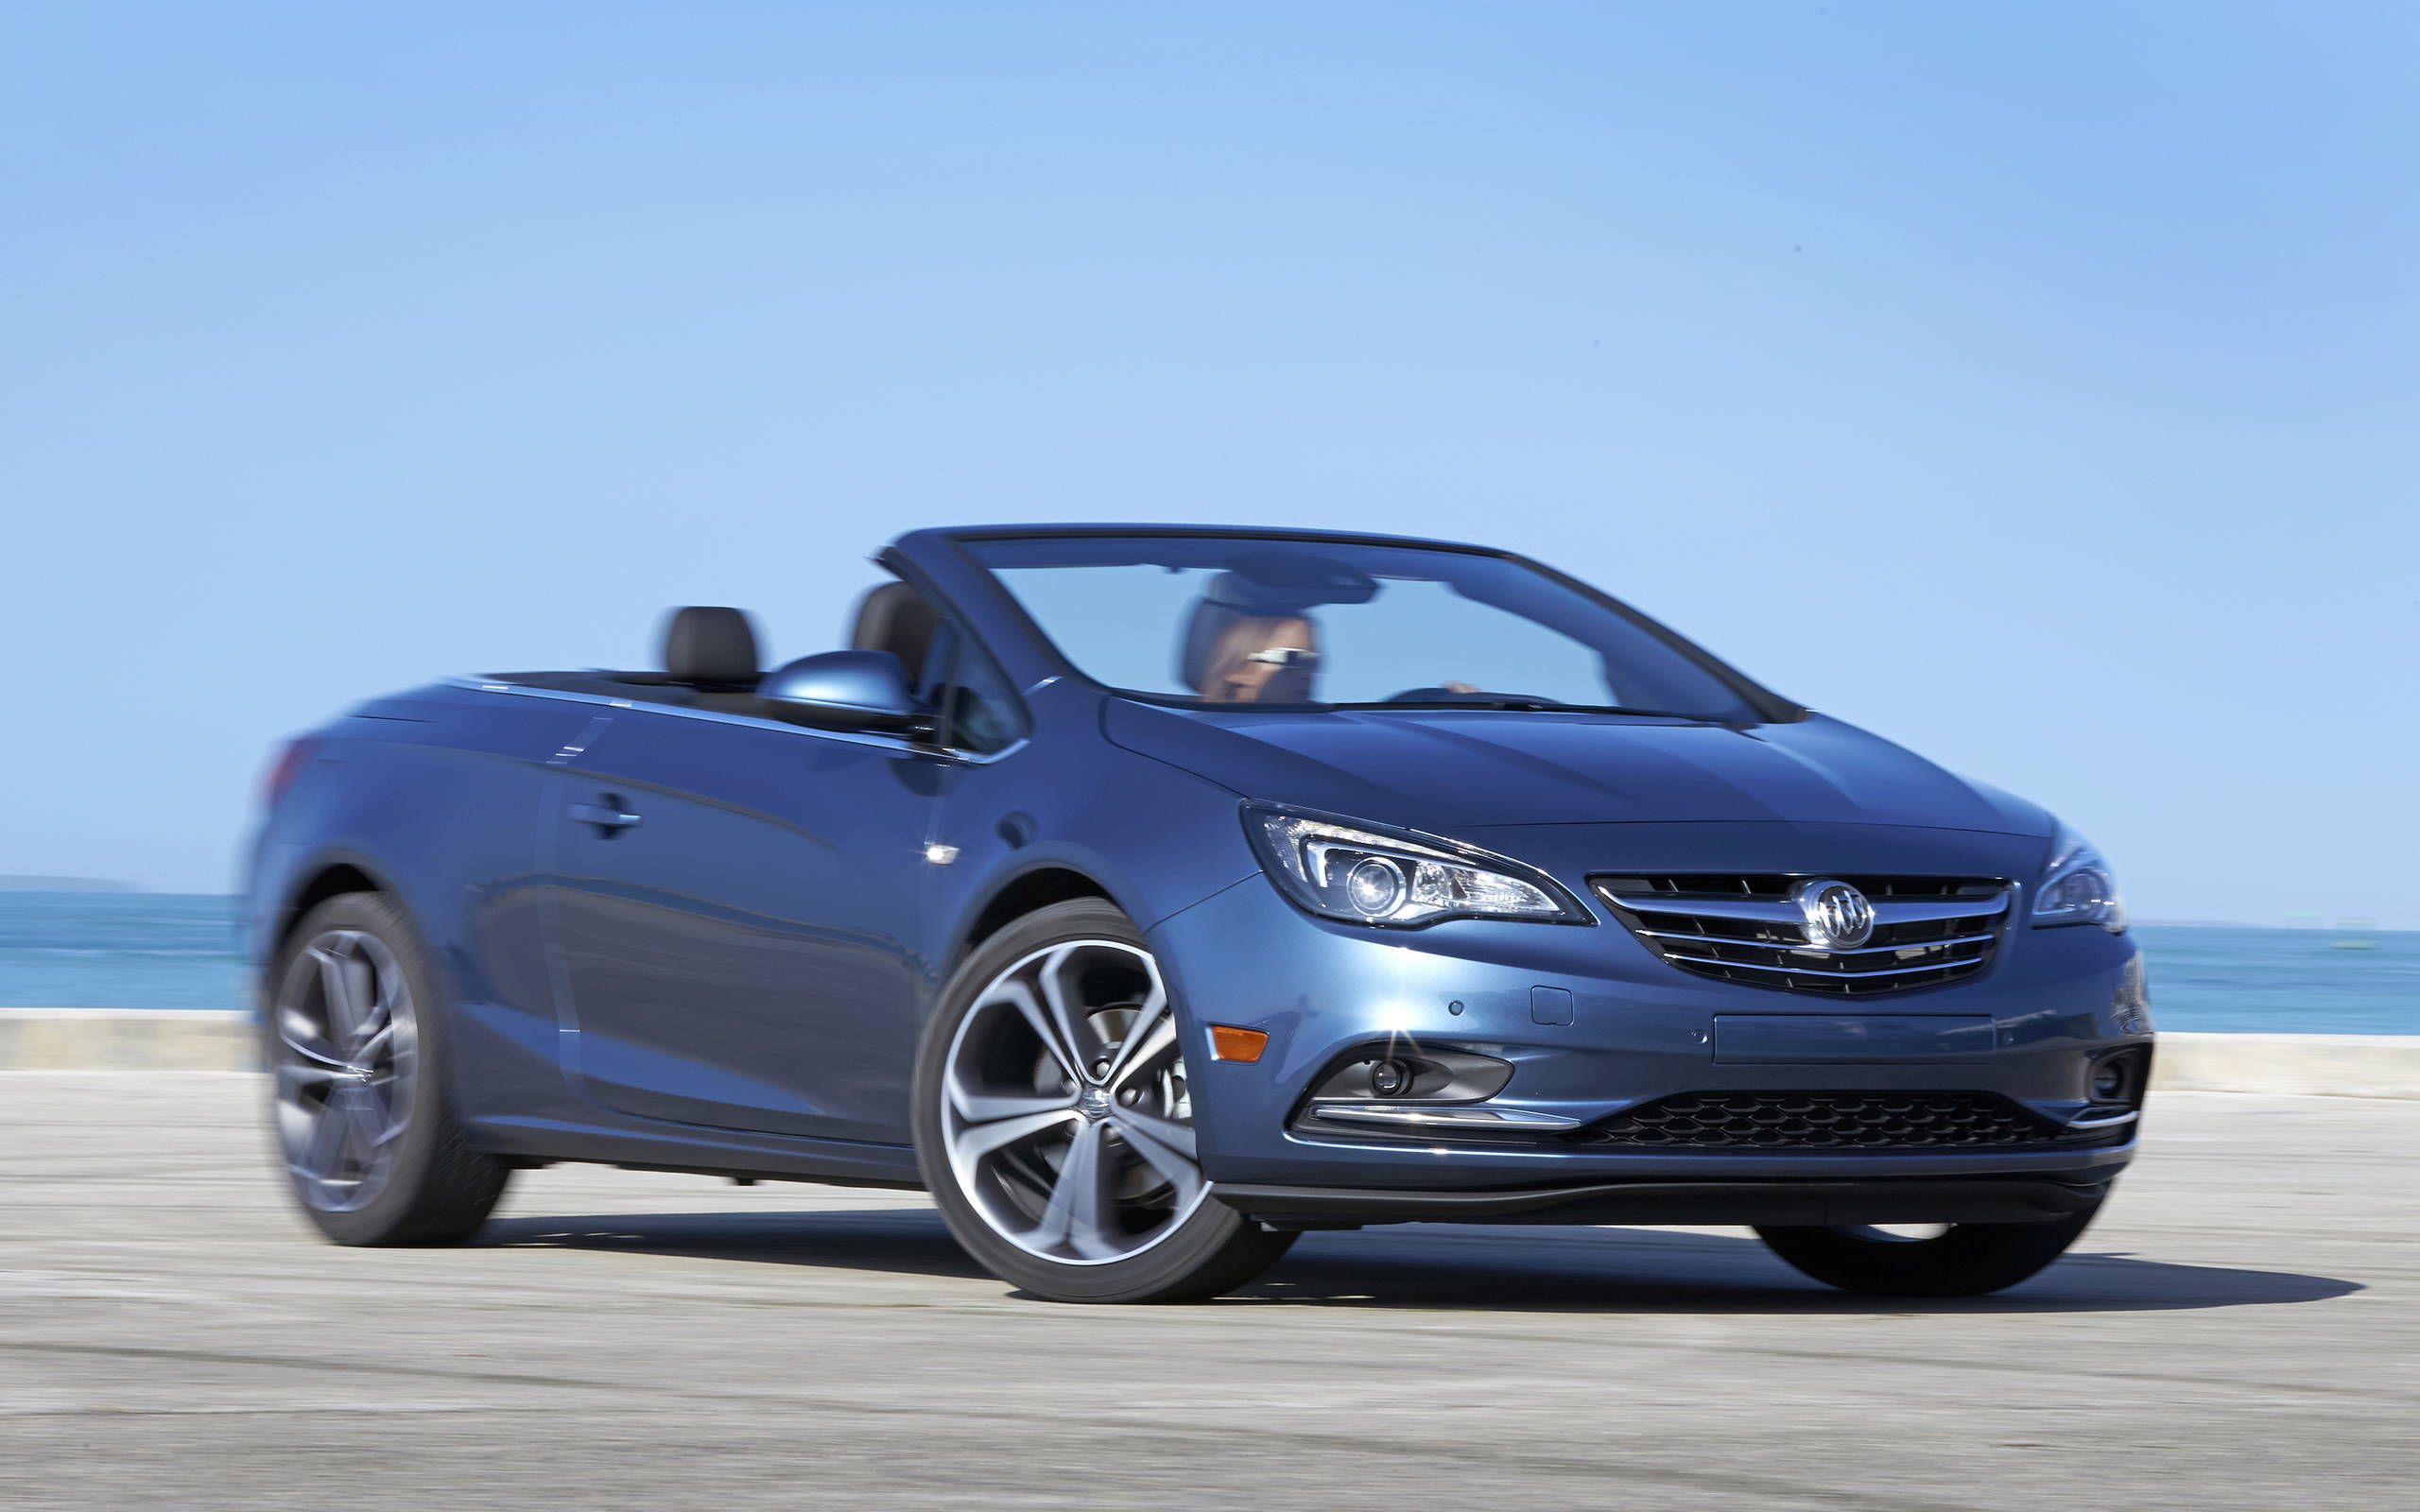 2016 Buick Cascada review: A cheerful drop-top for the non-enthusiast driver